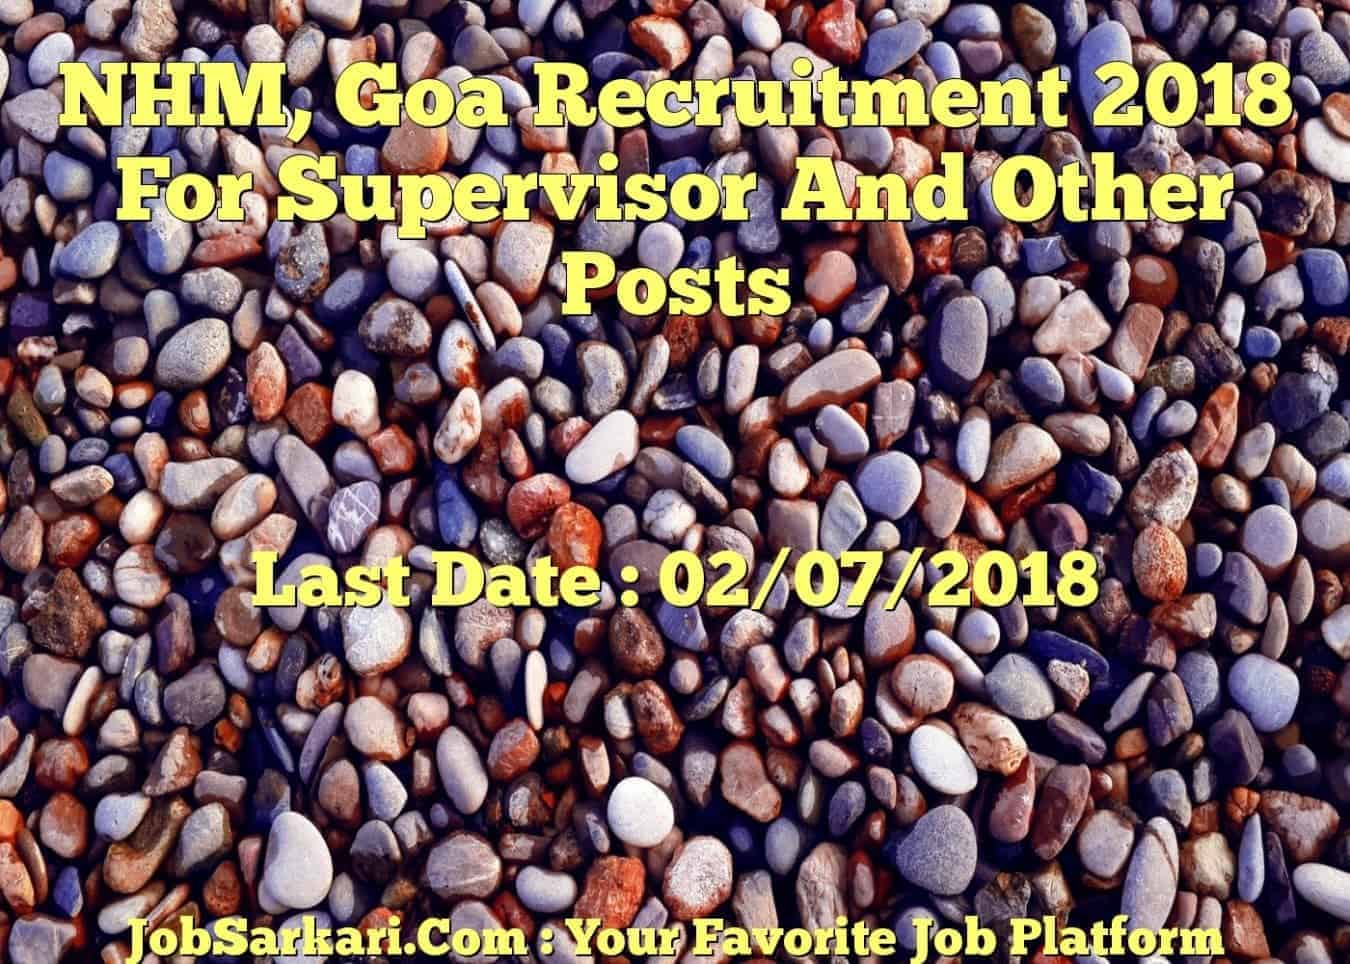 NHM, Goa Recruitment 2018 For Supervisor And Other Posts